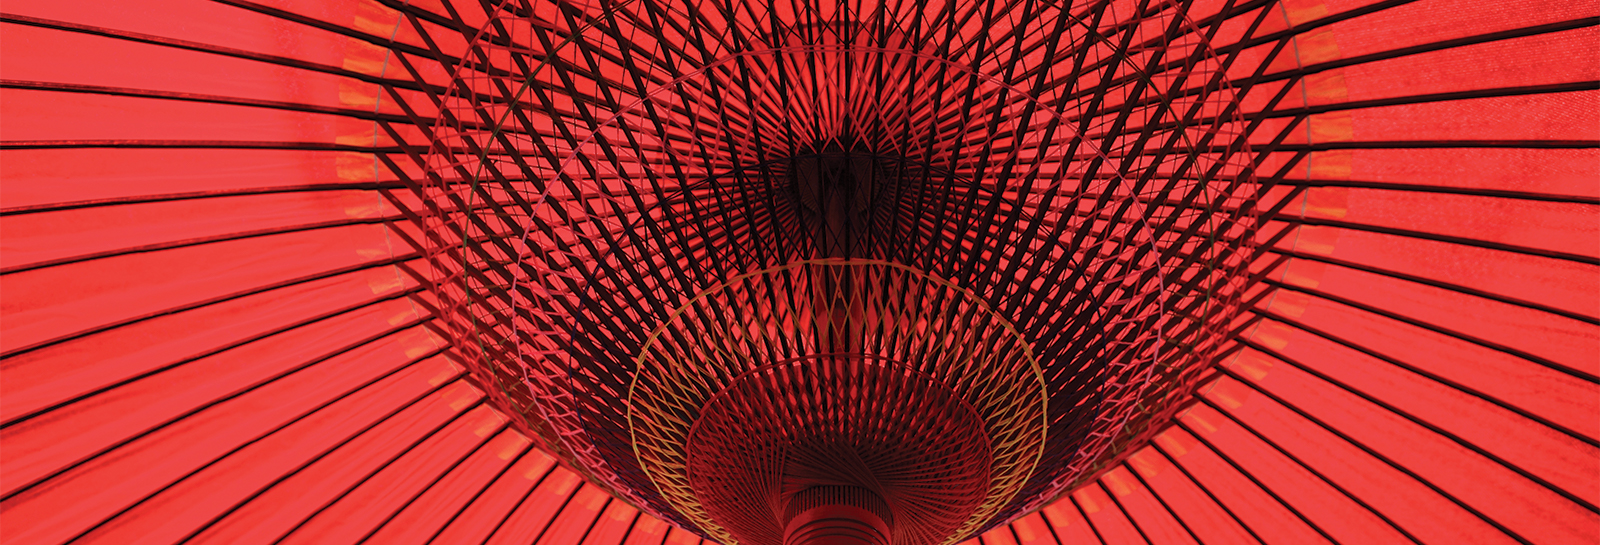 abstract image of a tower on a red background